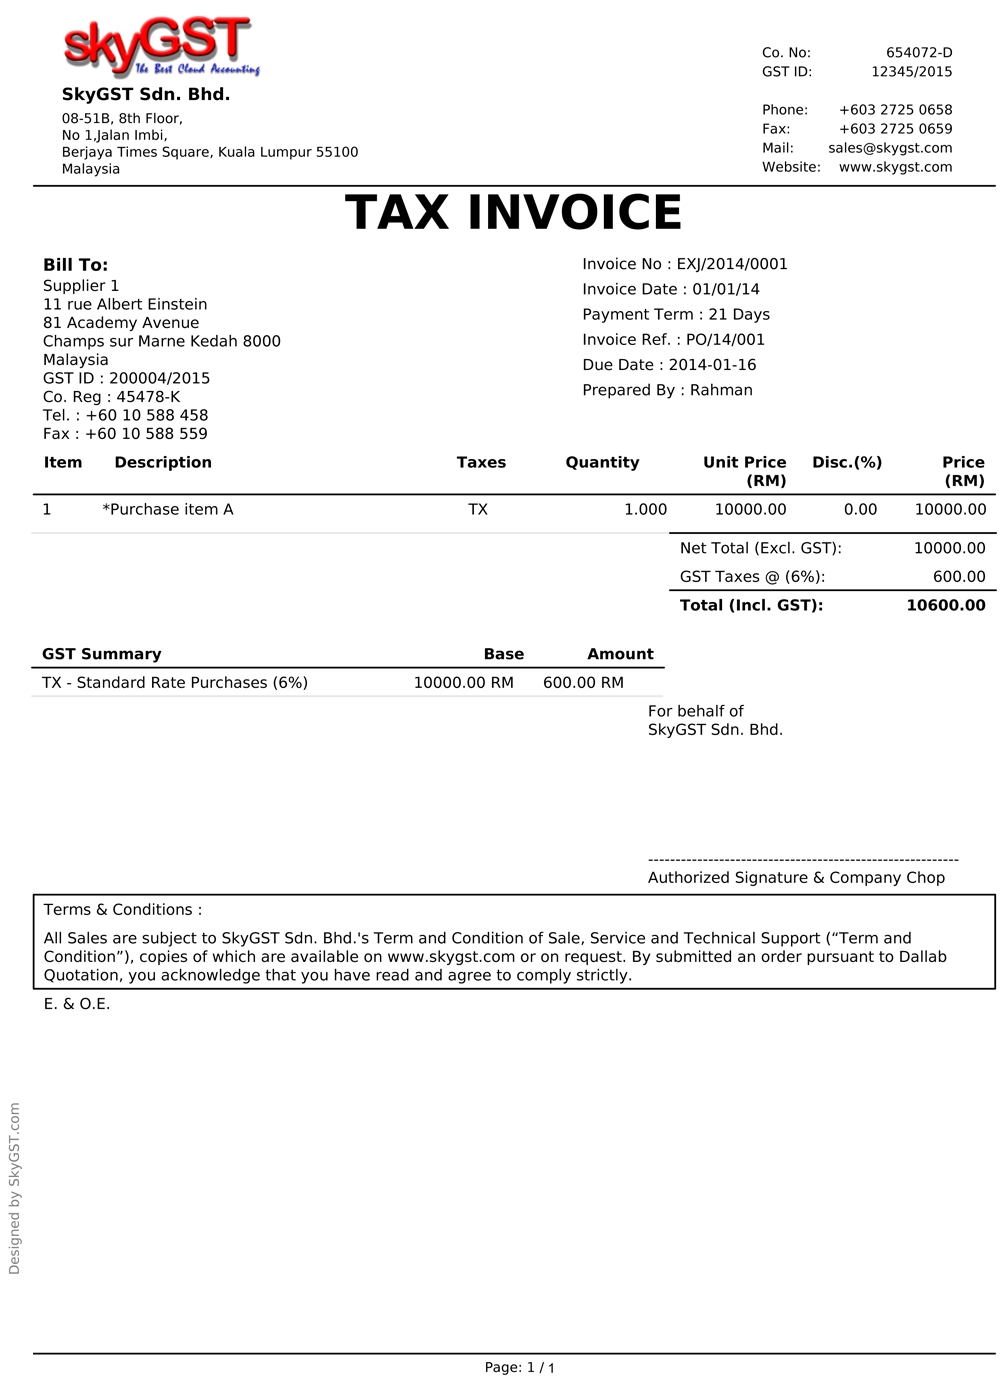 this tax invoice ok or not tax invoice gst